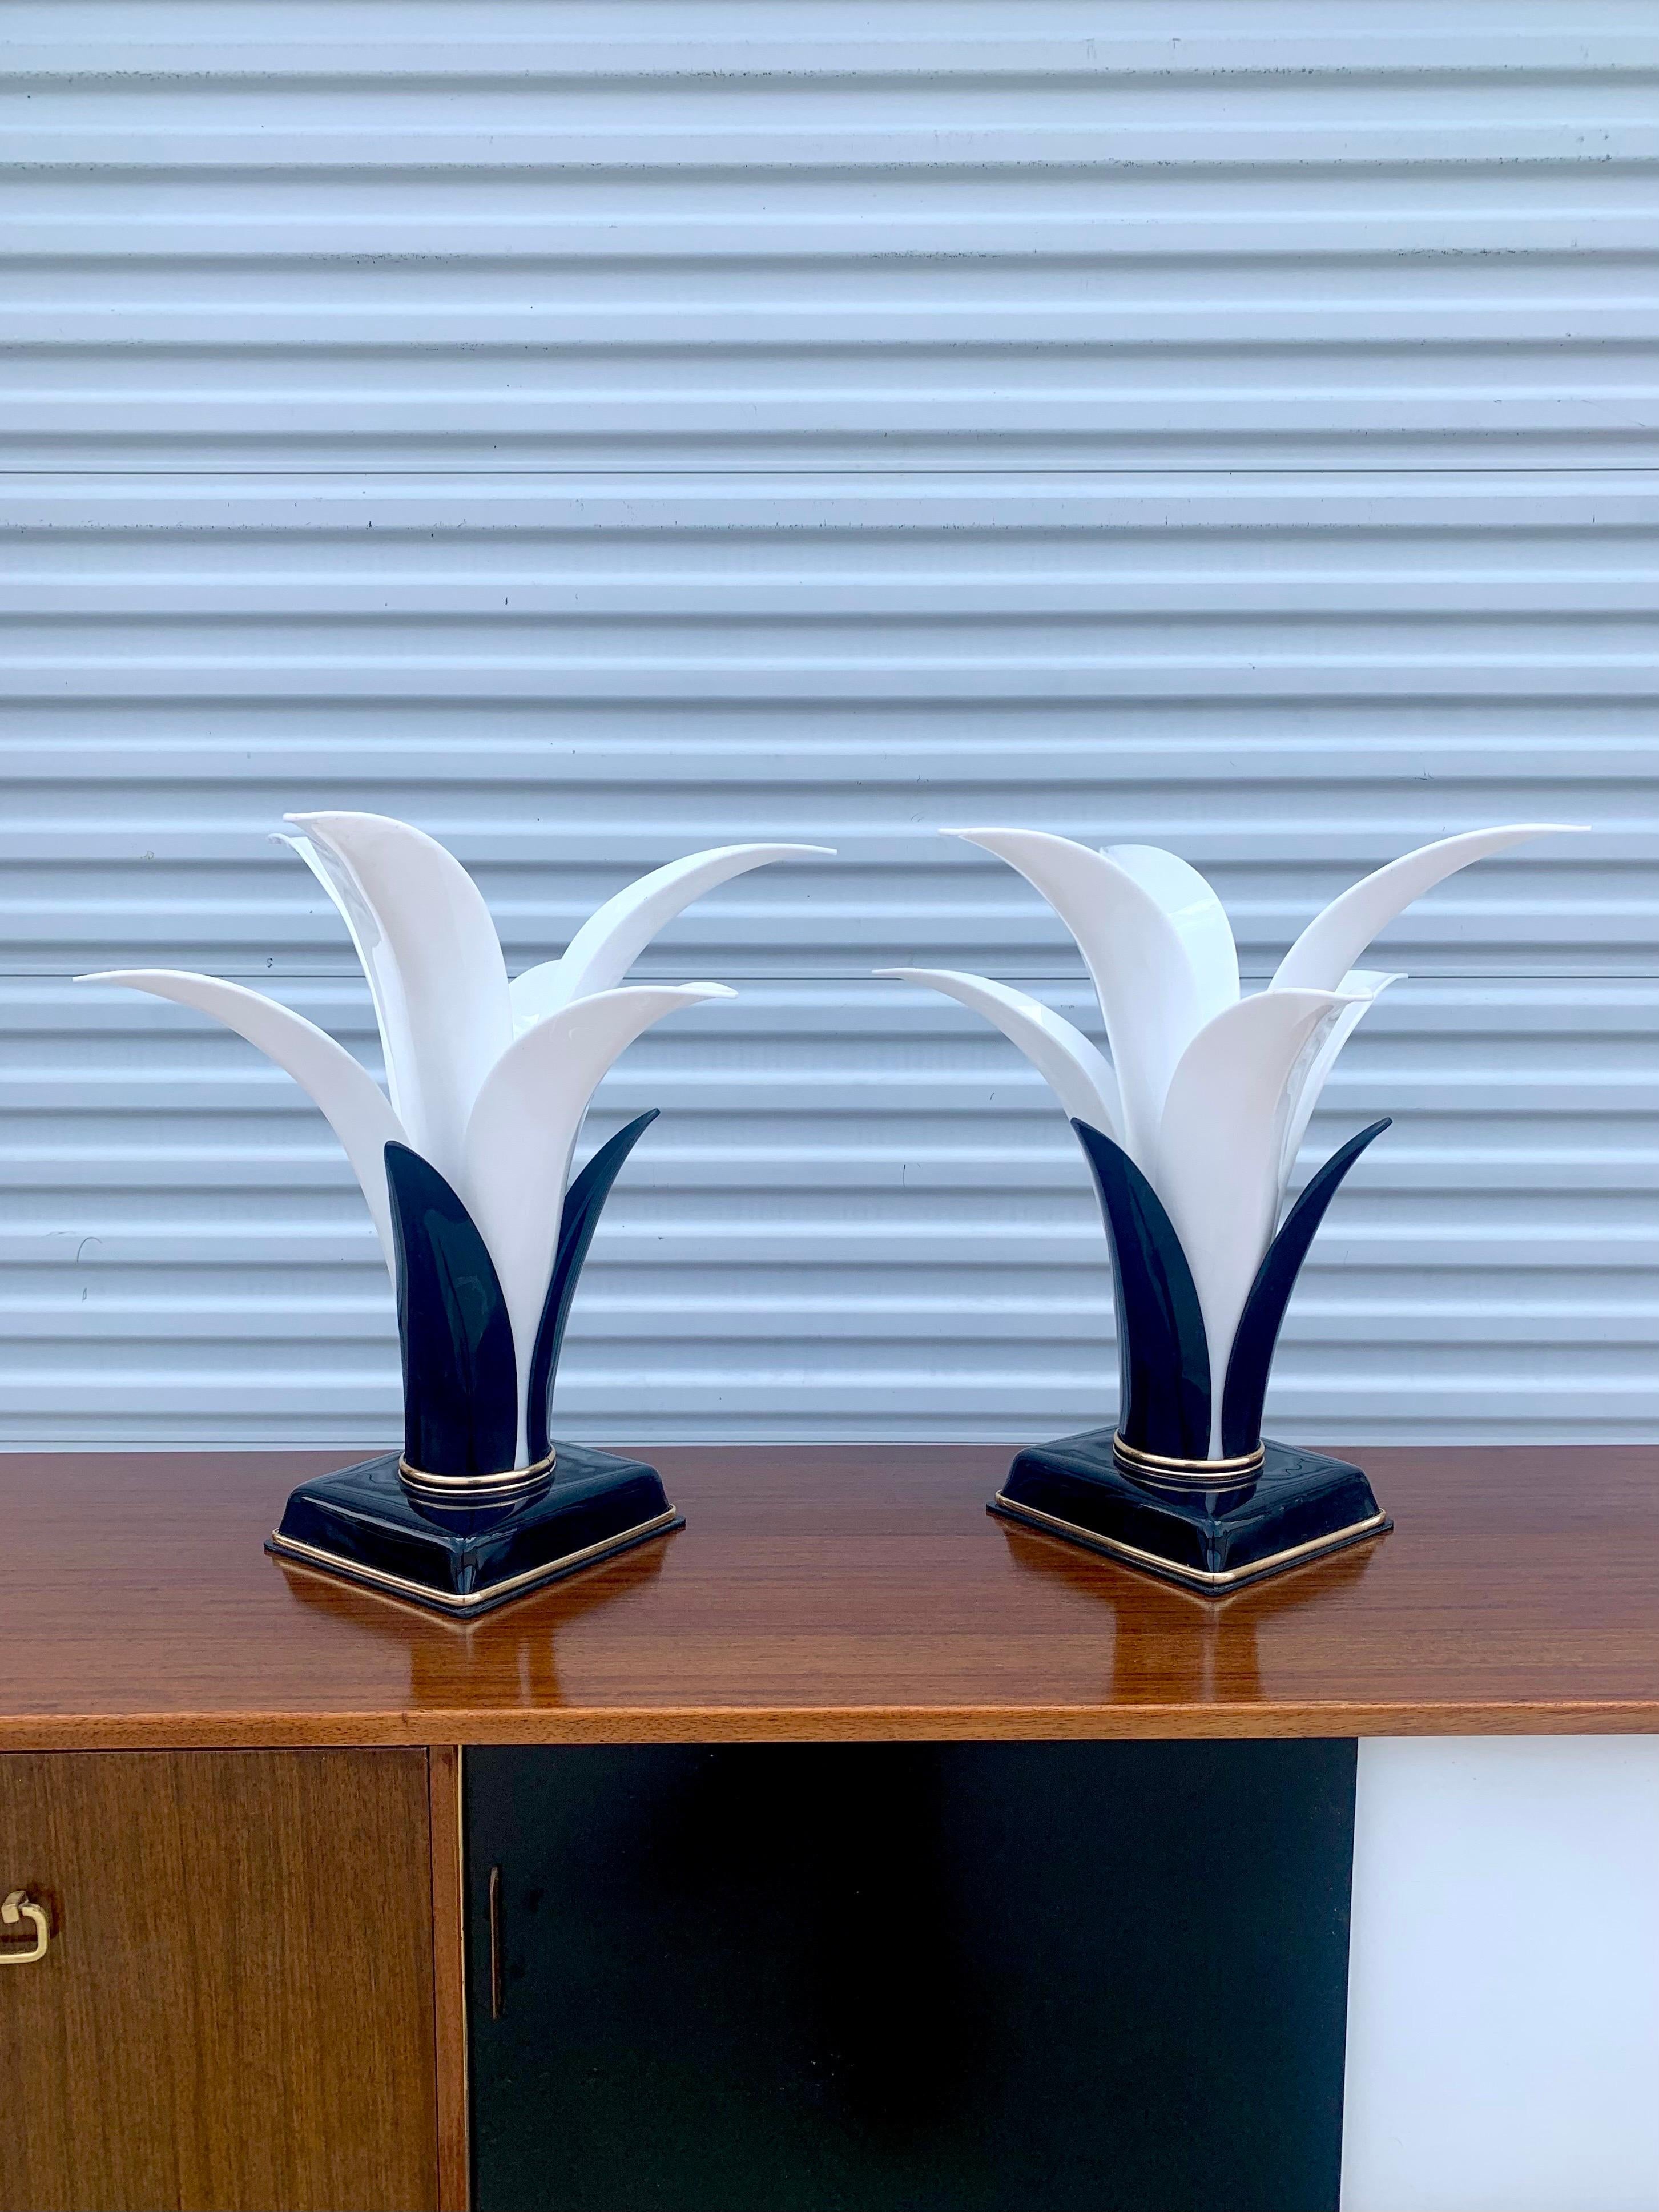 Mid-Century Modern Rougier Style Lamps by Acrylic Designs in Miami, a Pair, Circa 1980s